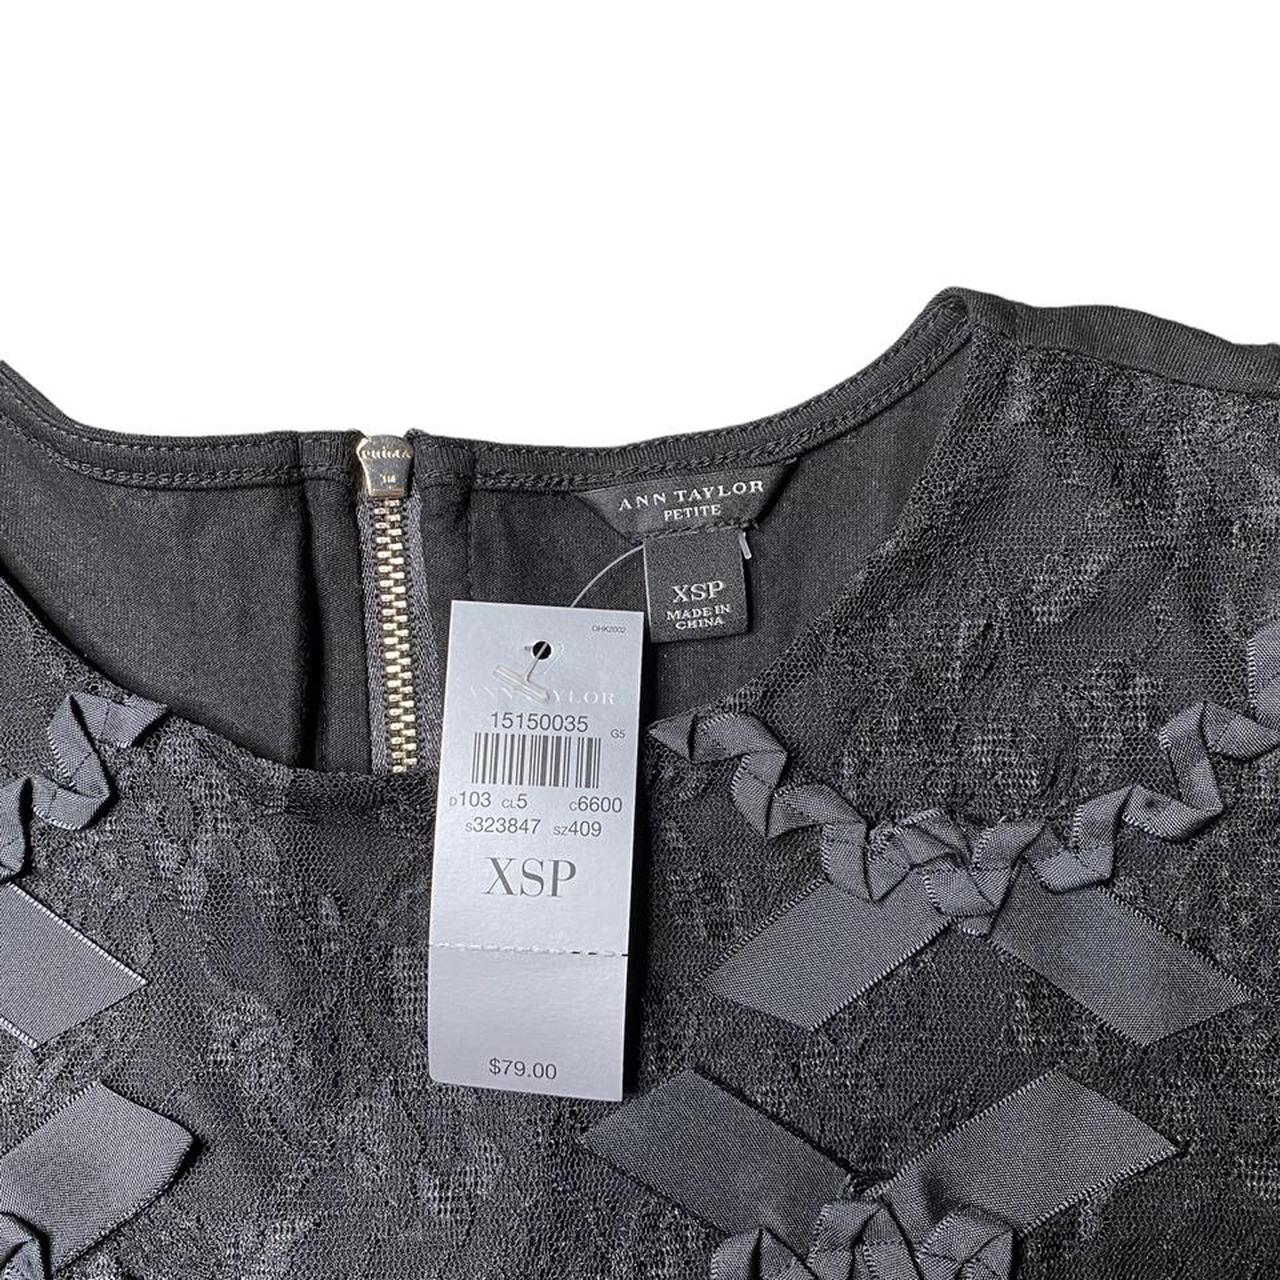 Product Image 3 - NWT Black Lace Top
- Brand